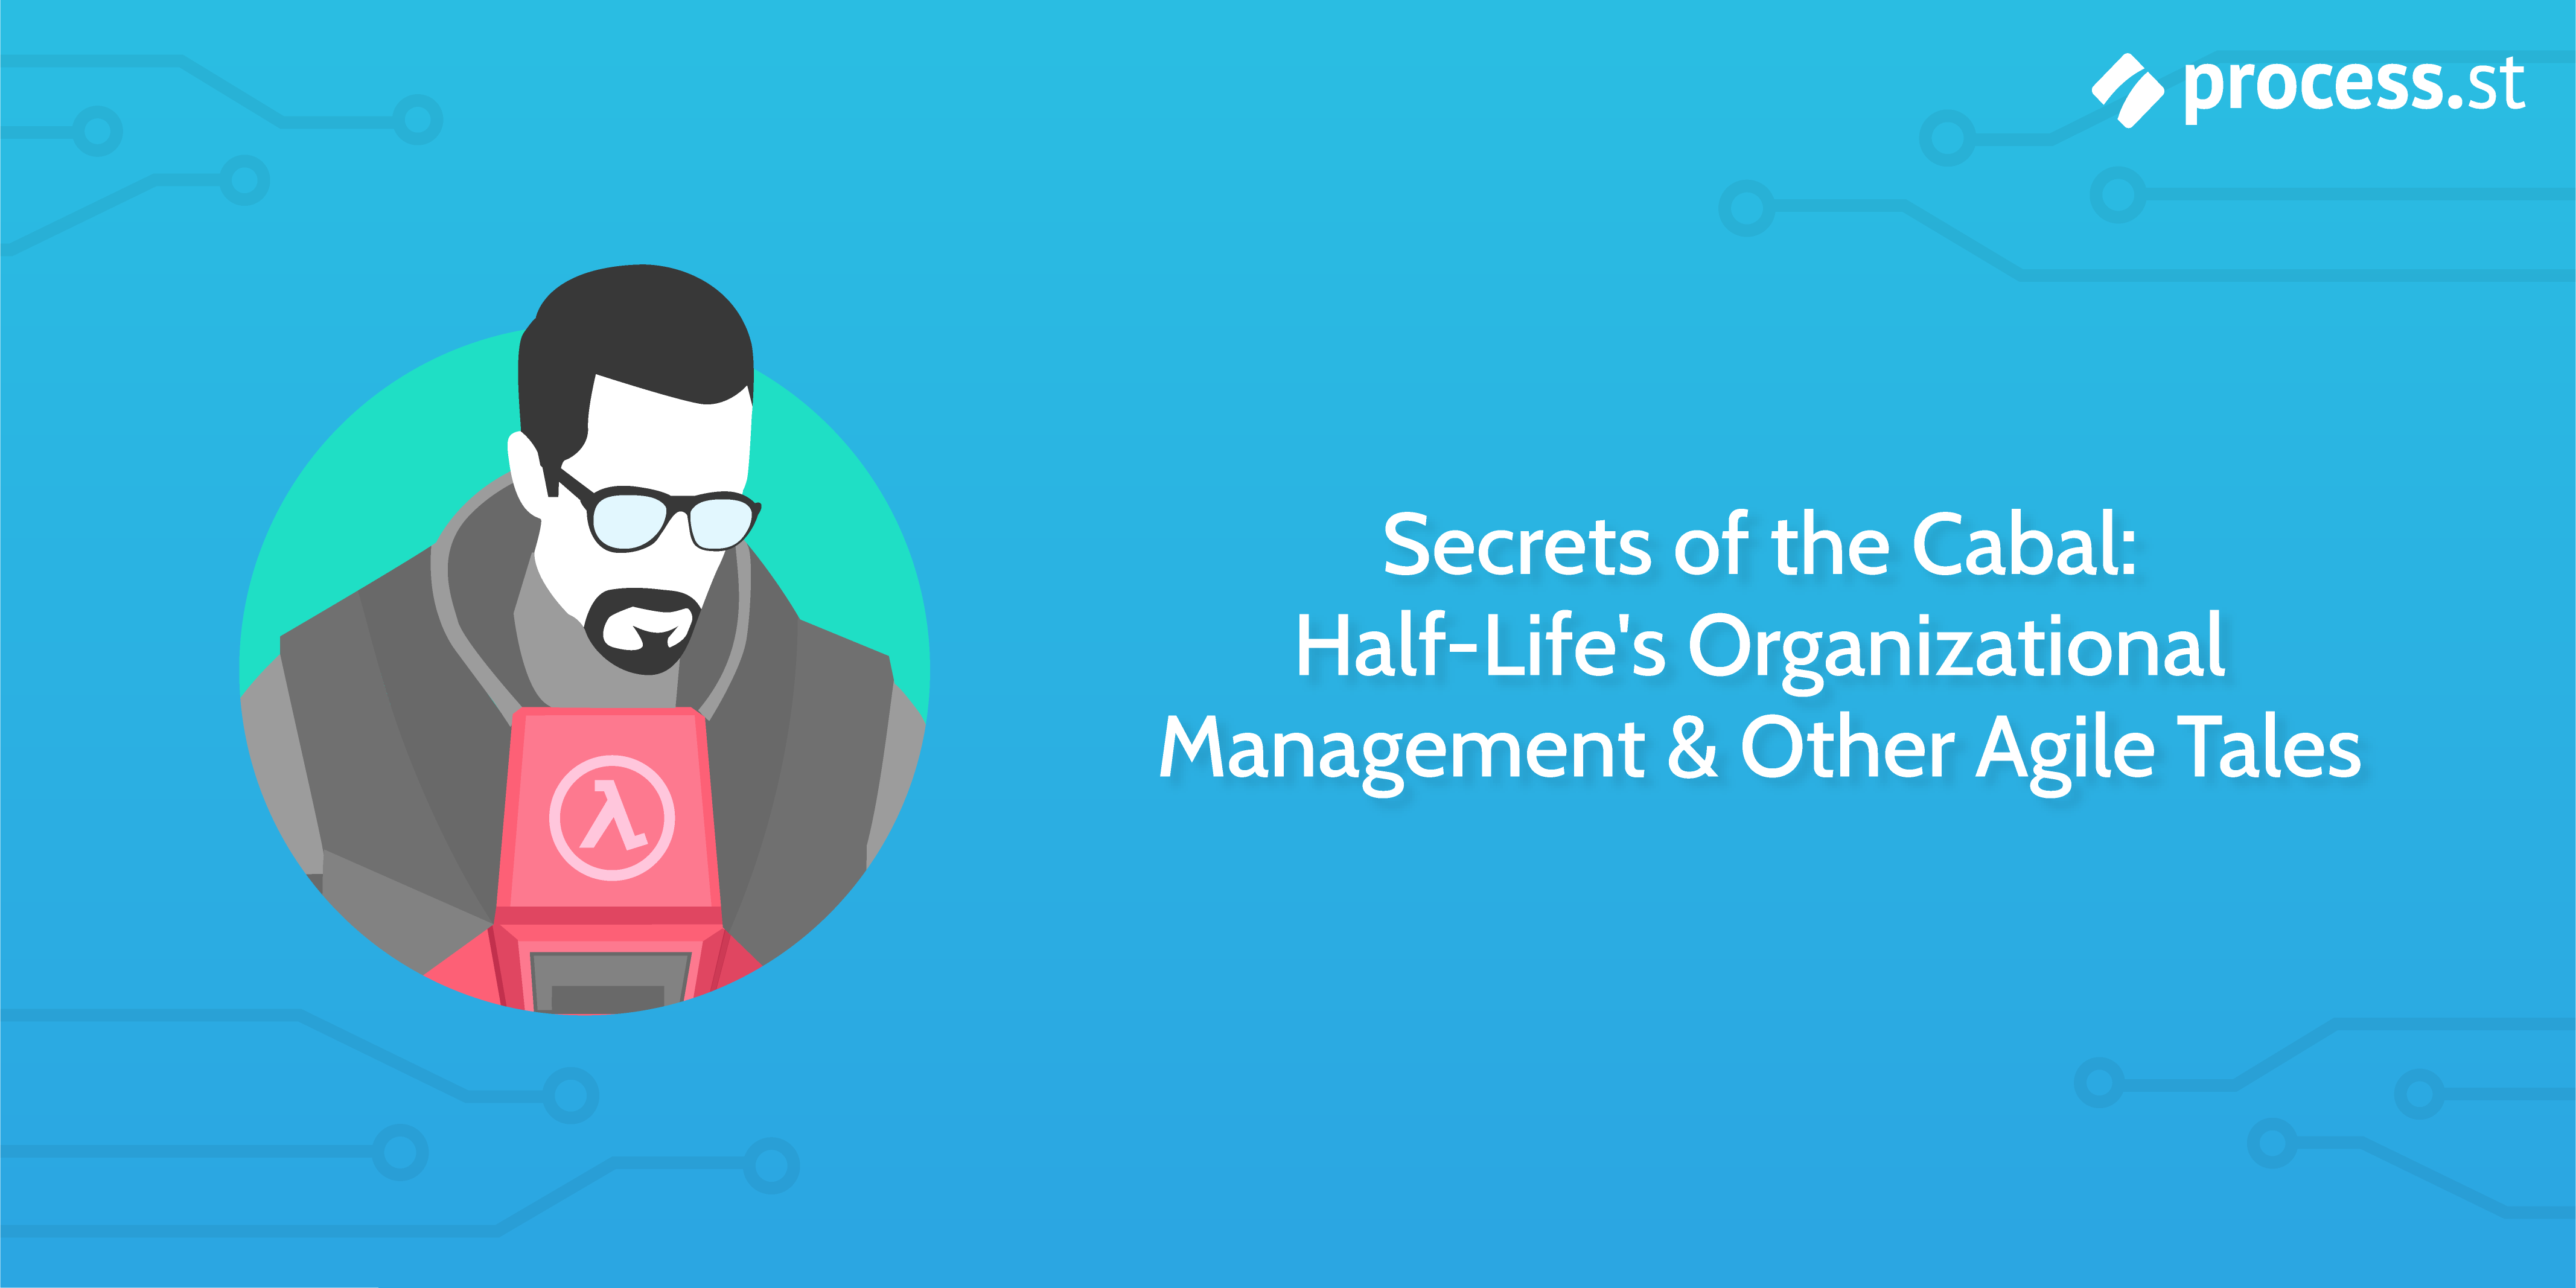 Secrets of the Cabal Half-Life's Organizational Management & Other Agile Tales